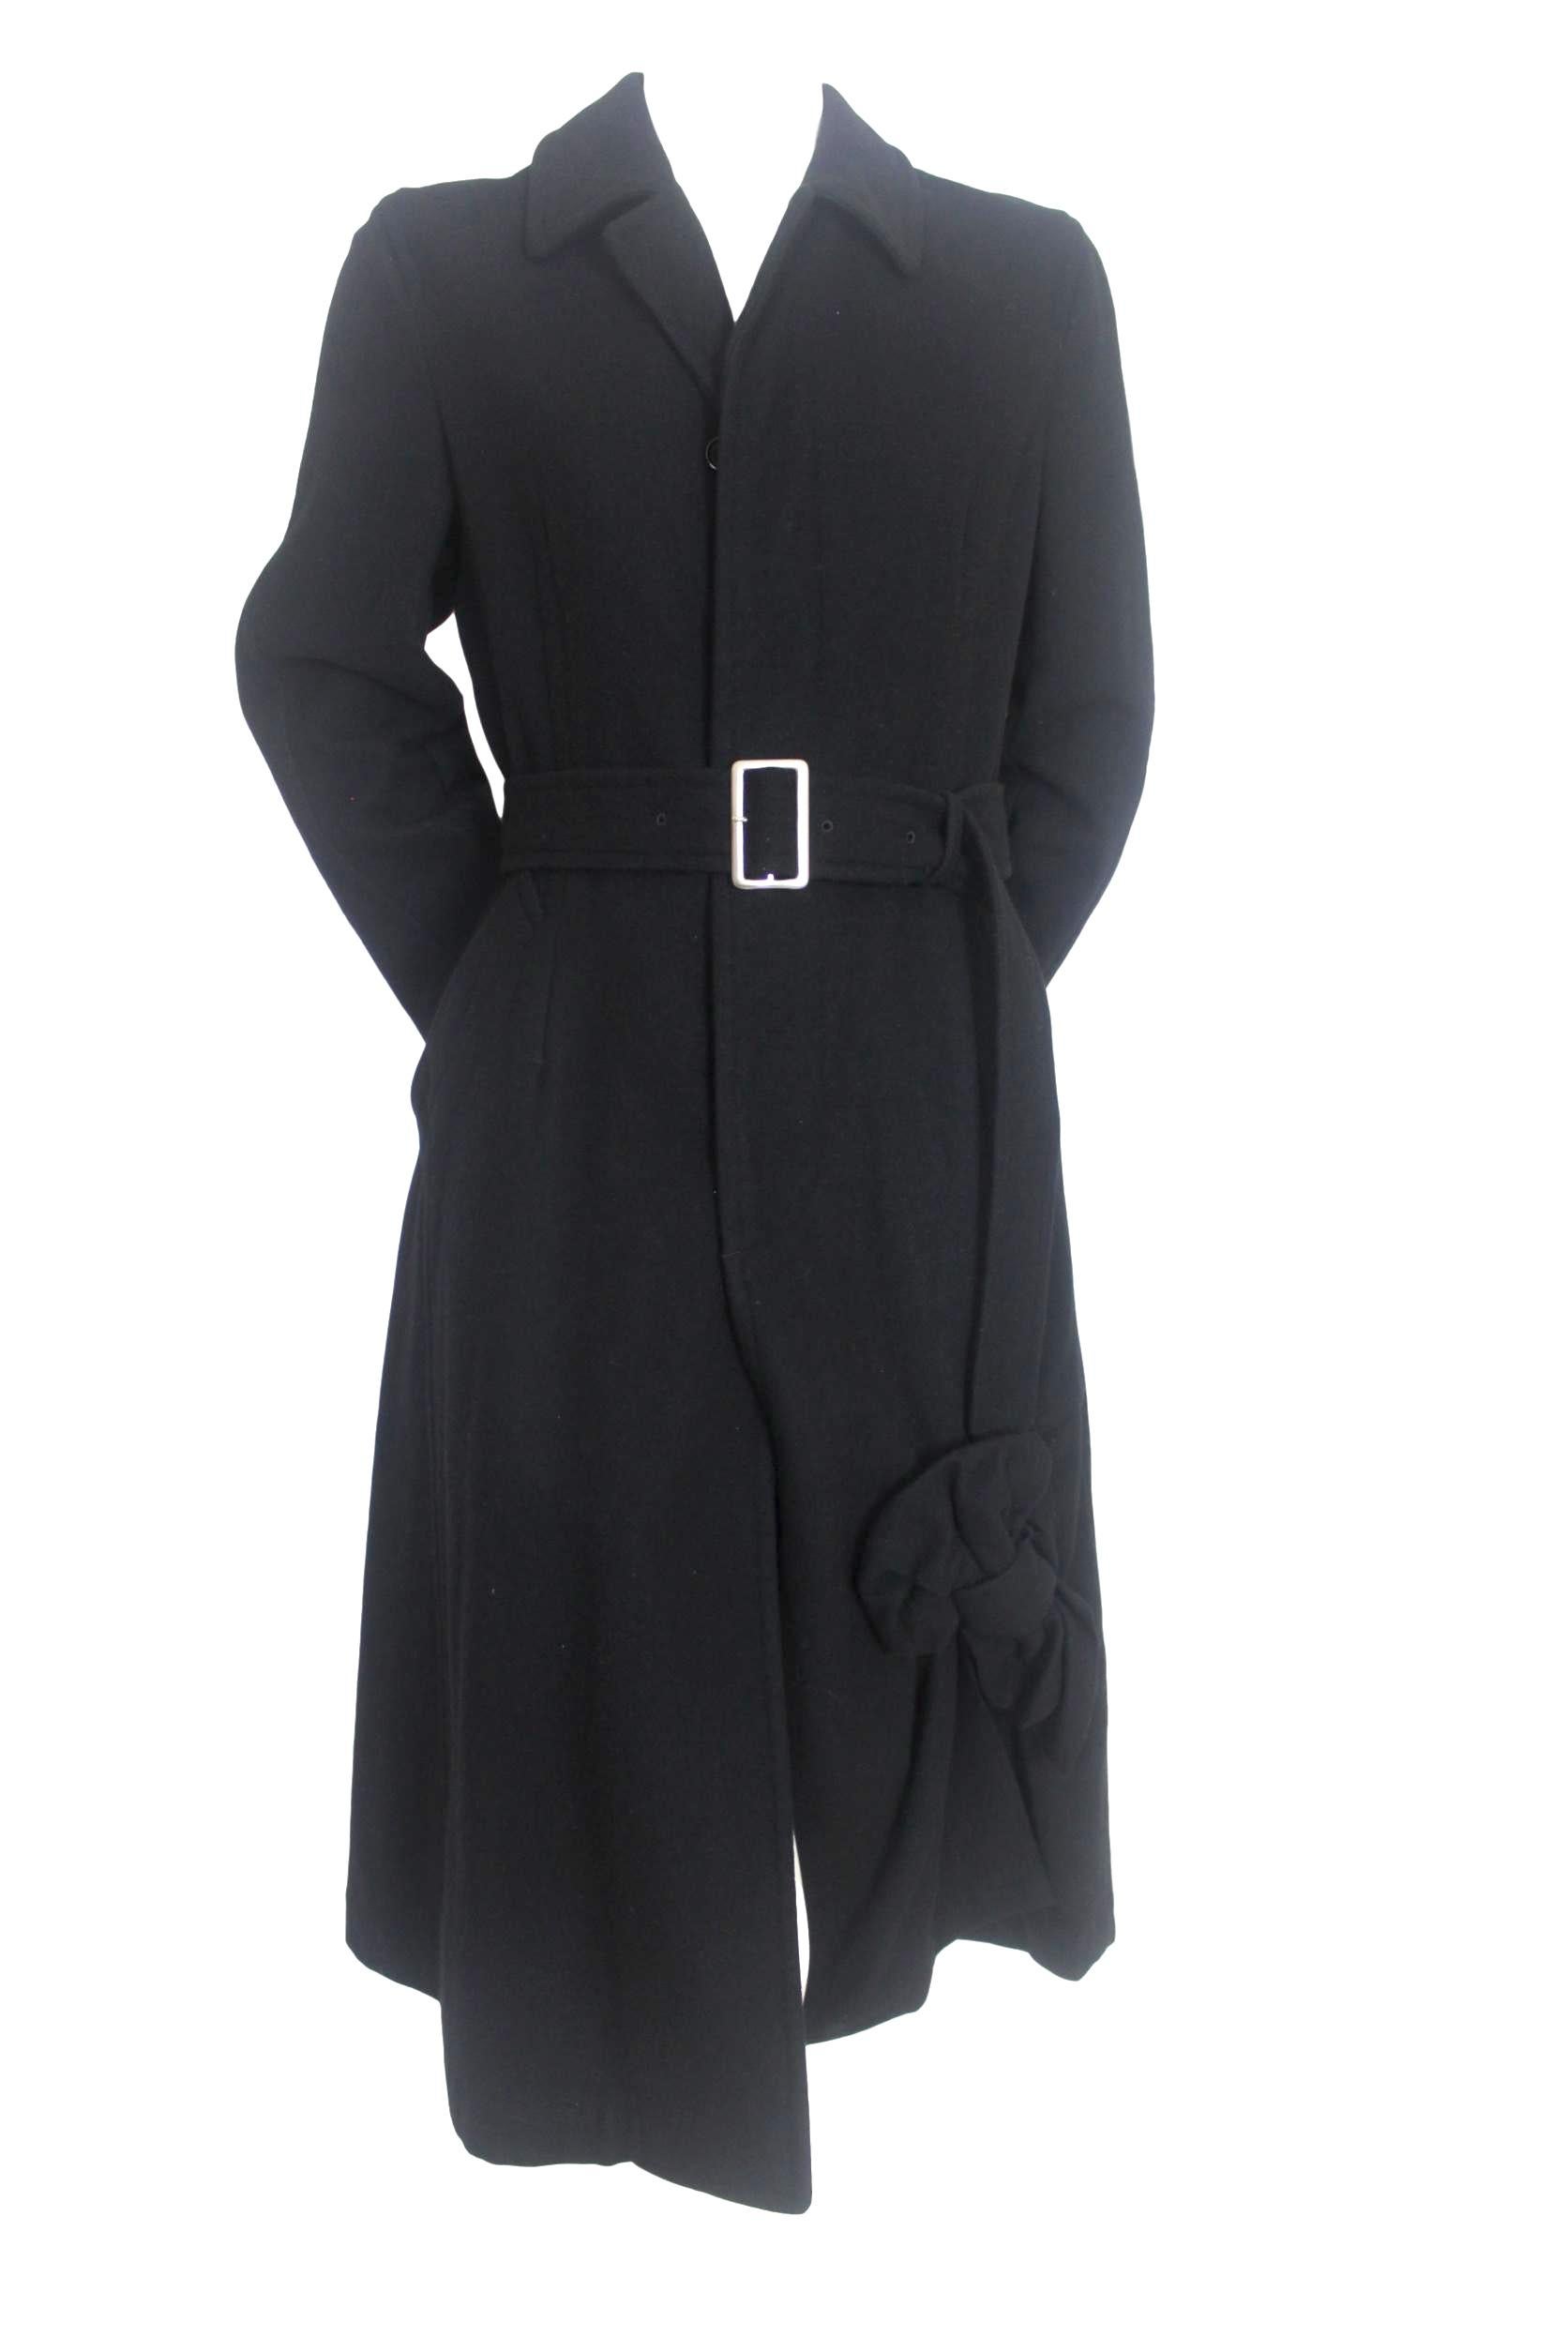 Comme des Garcons 2006 Collection Wool Coat with Bow Decoration For Sale 12